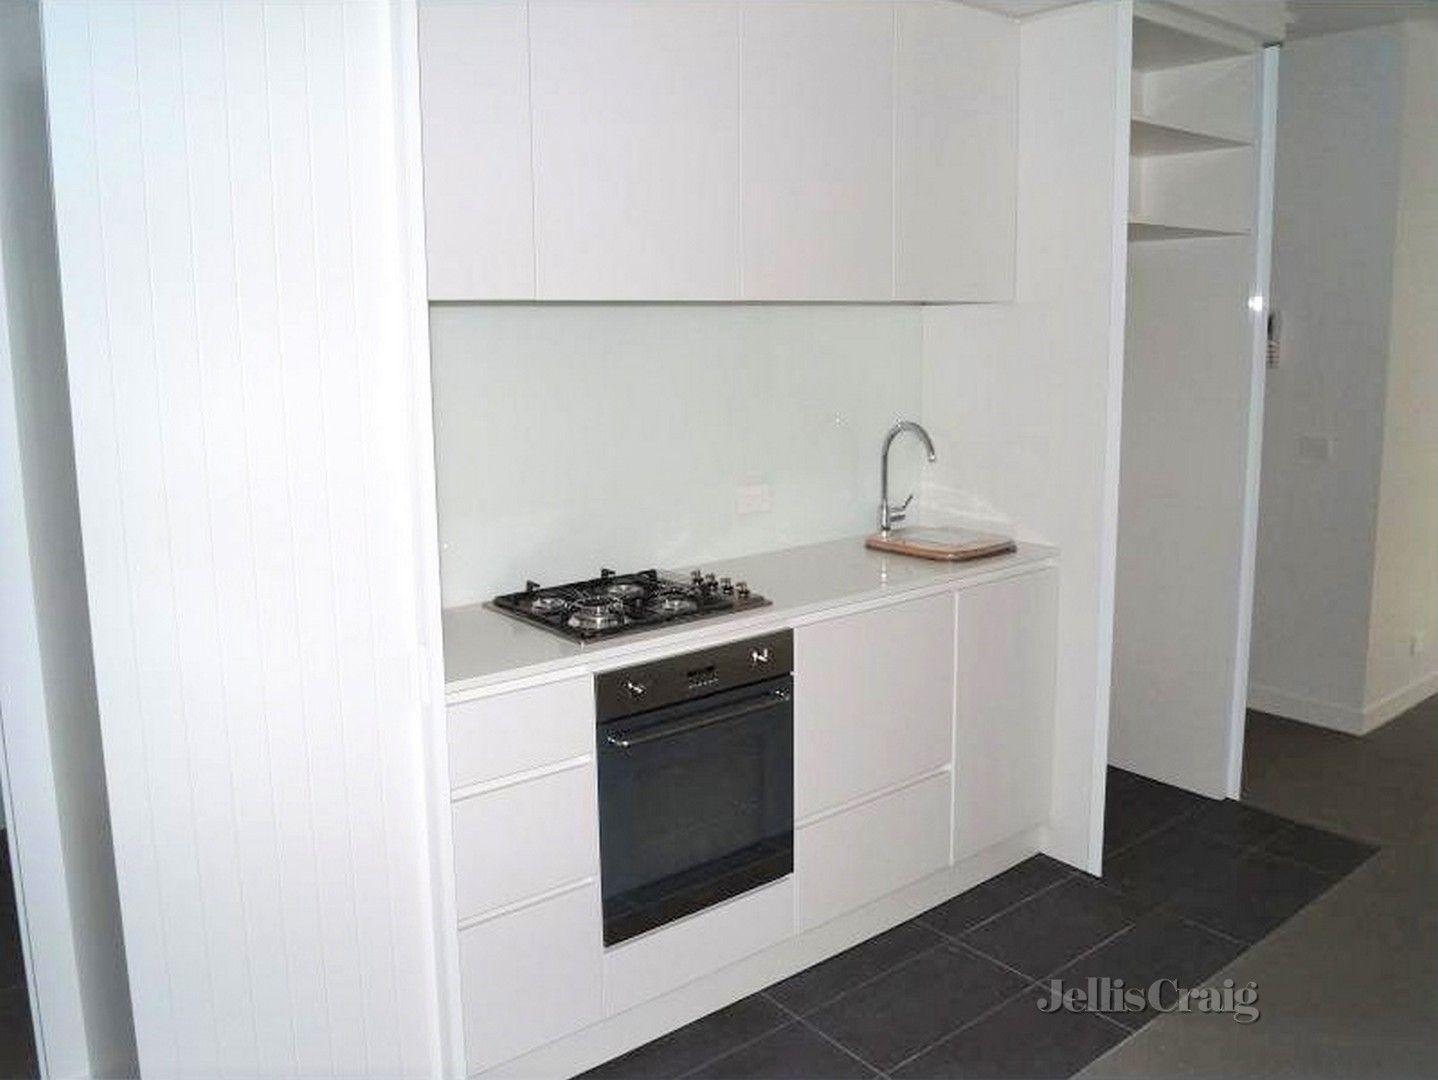 2 bedrooms House in 206/25 Lynch Street HAWTHORN VIC, 3122